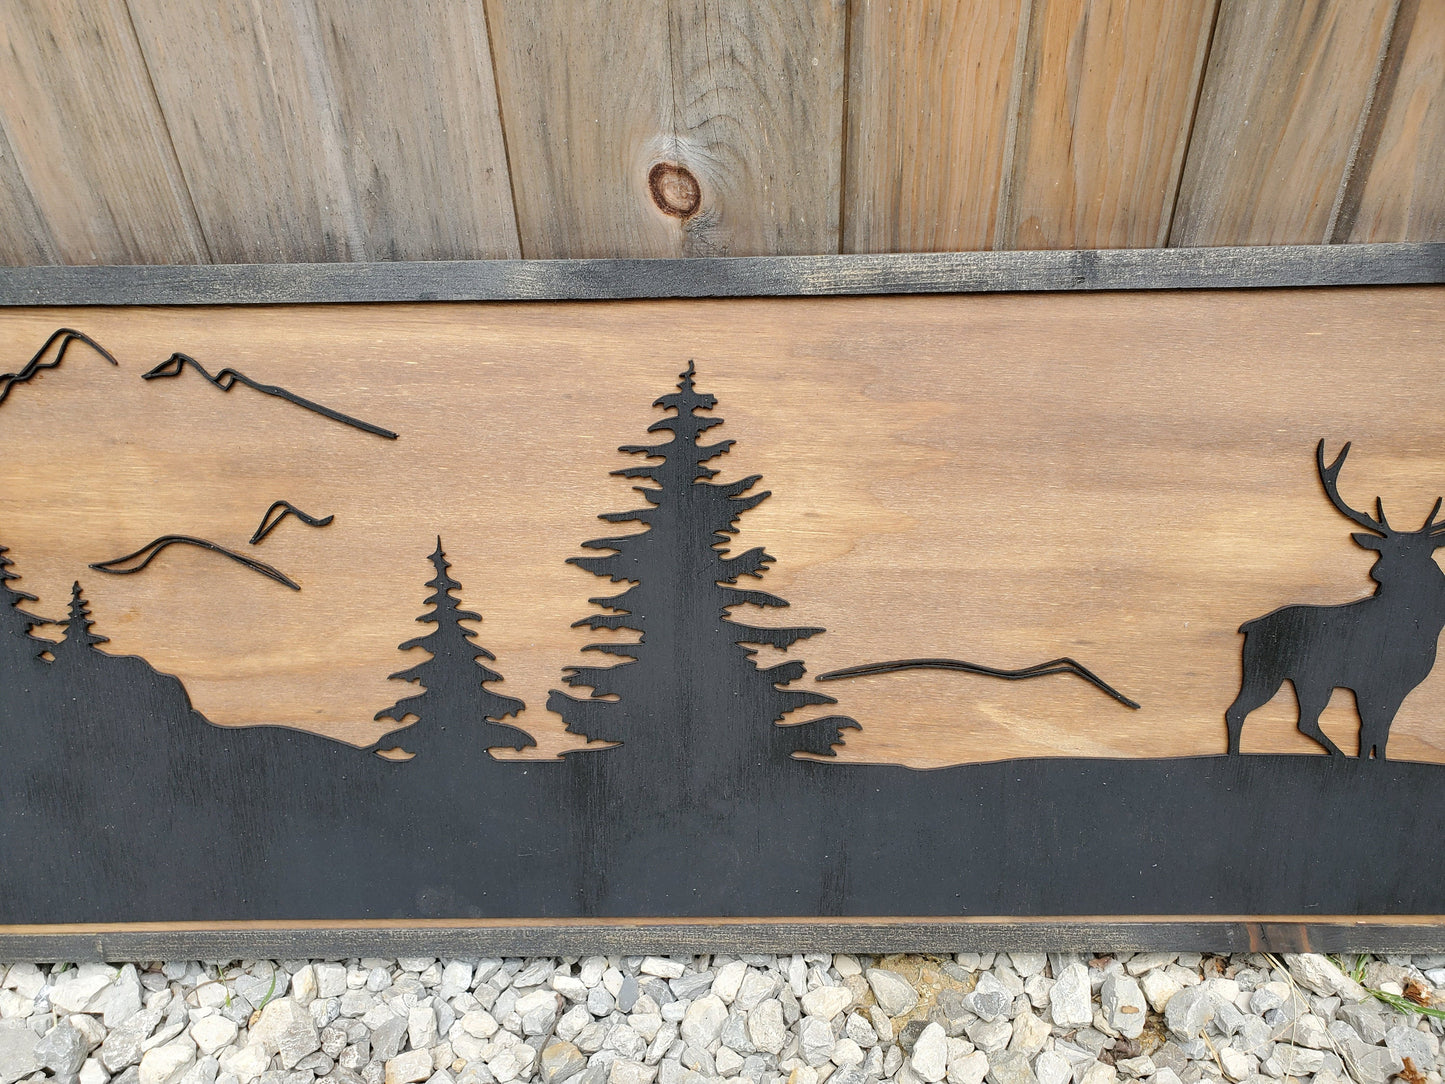 Large Custom Ranch Sign, Deer, Elk, Mountain, Cabin, Scenery, Rustic, Lodge, Wood, Laser Cut Out, 3D, Extra Large, Couch Sign